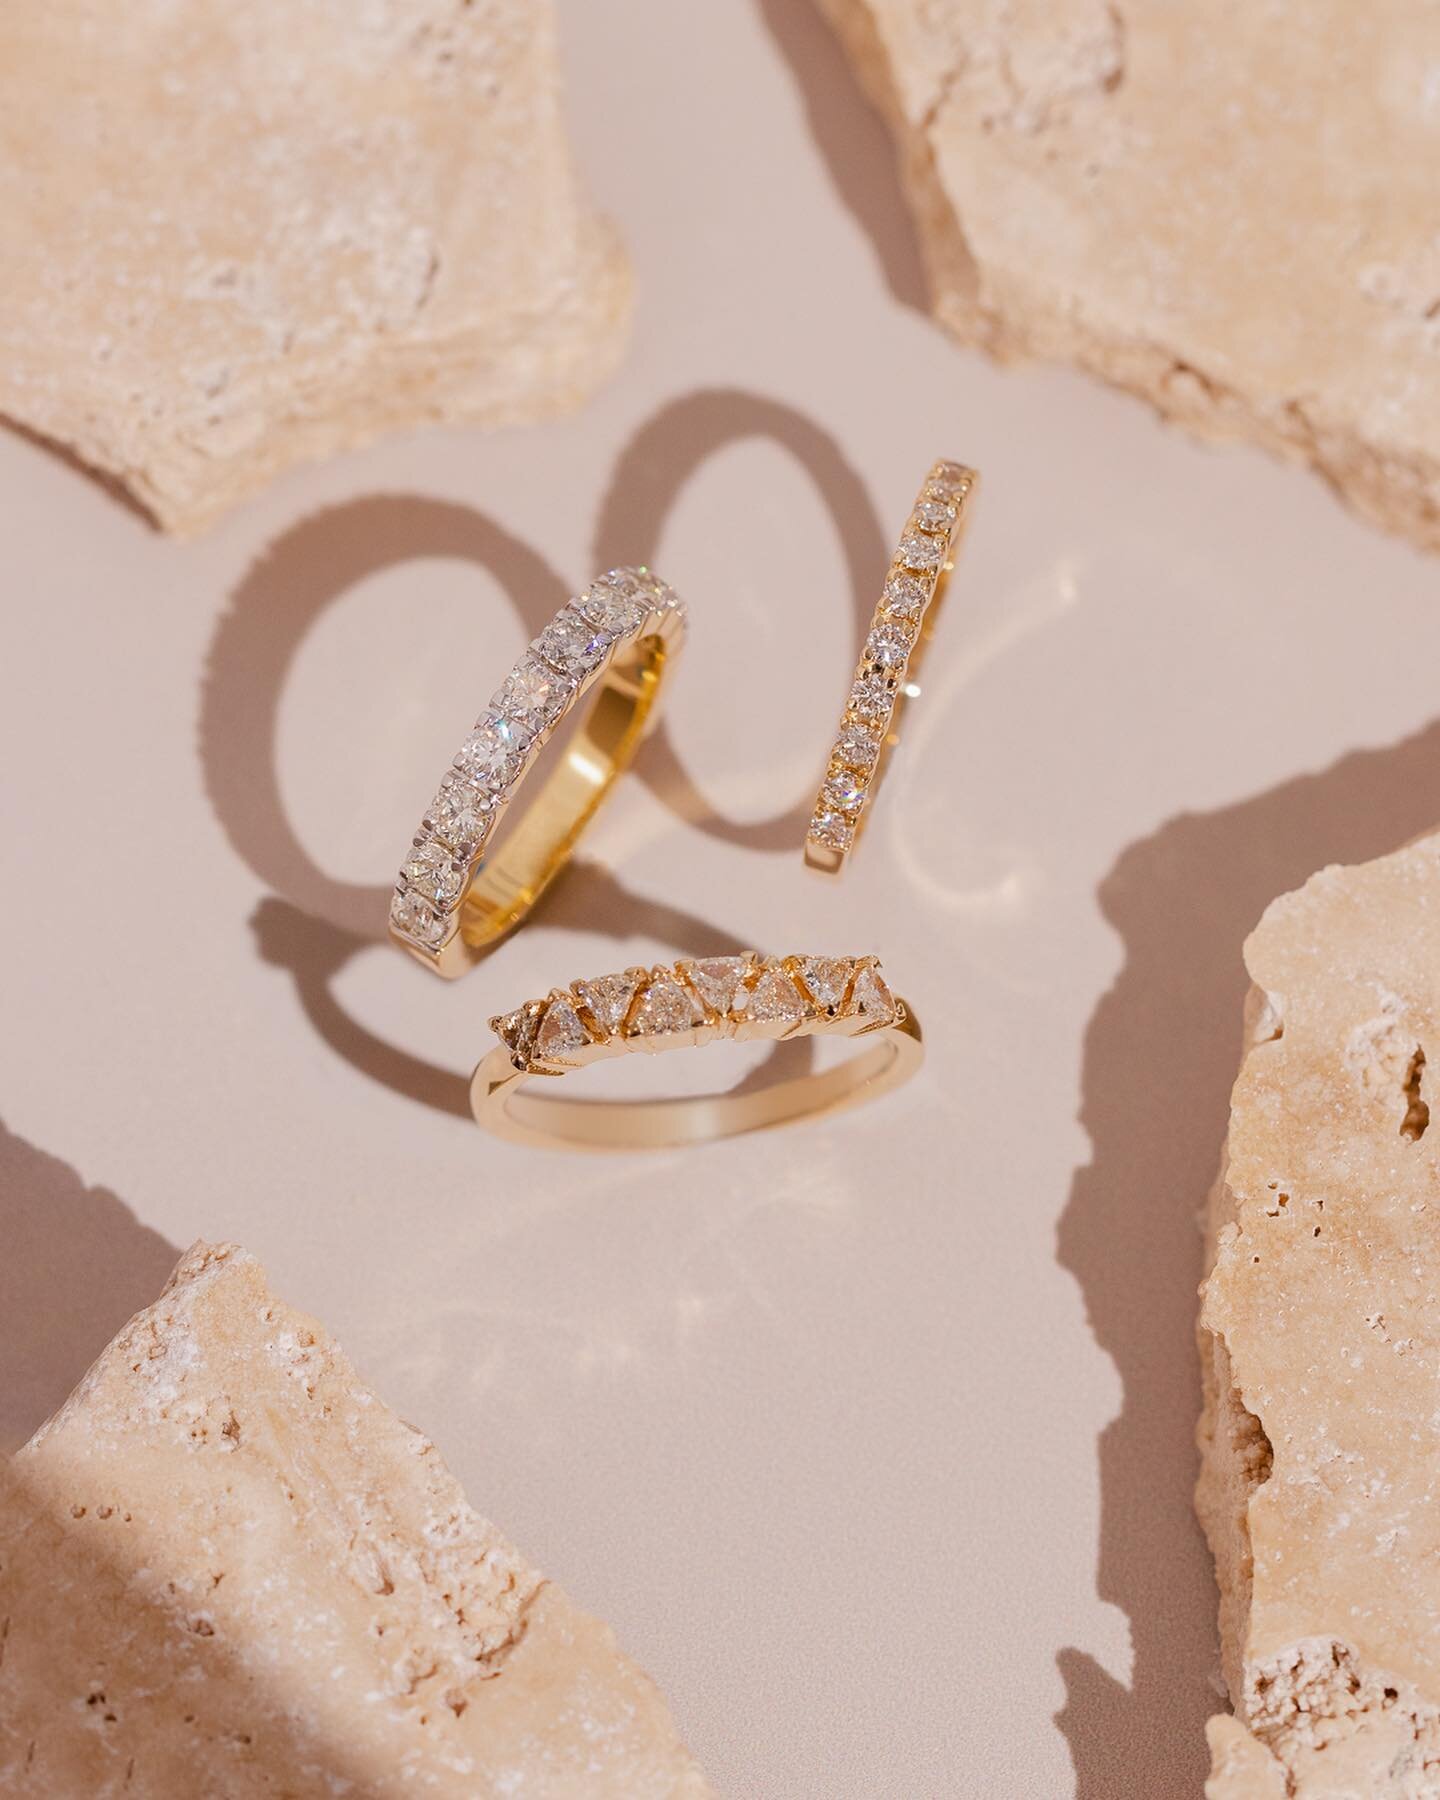 Which Jewelry shot is your favourite? 

Shot for @carboncarats 
.
.
.
.

#jewelry #jewelryphotography #productphotography #photographer #productphotographer #commercialphotographer #commercialphotography #productphotoshoot #advertisingphotography #ad